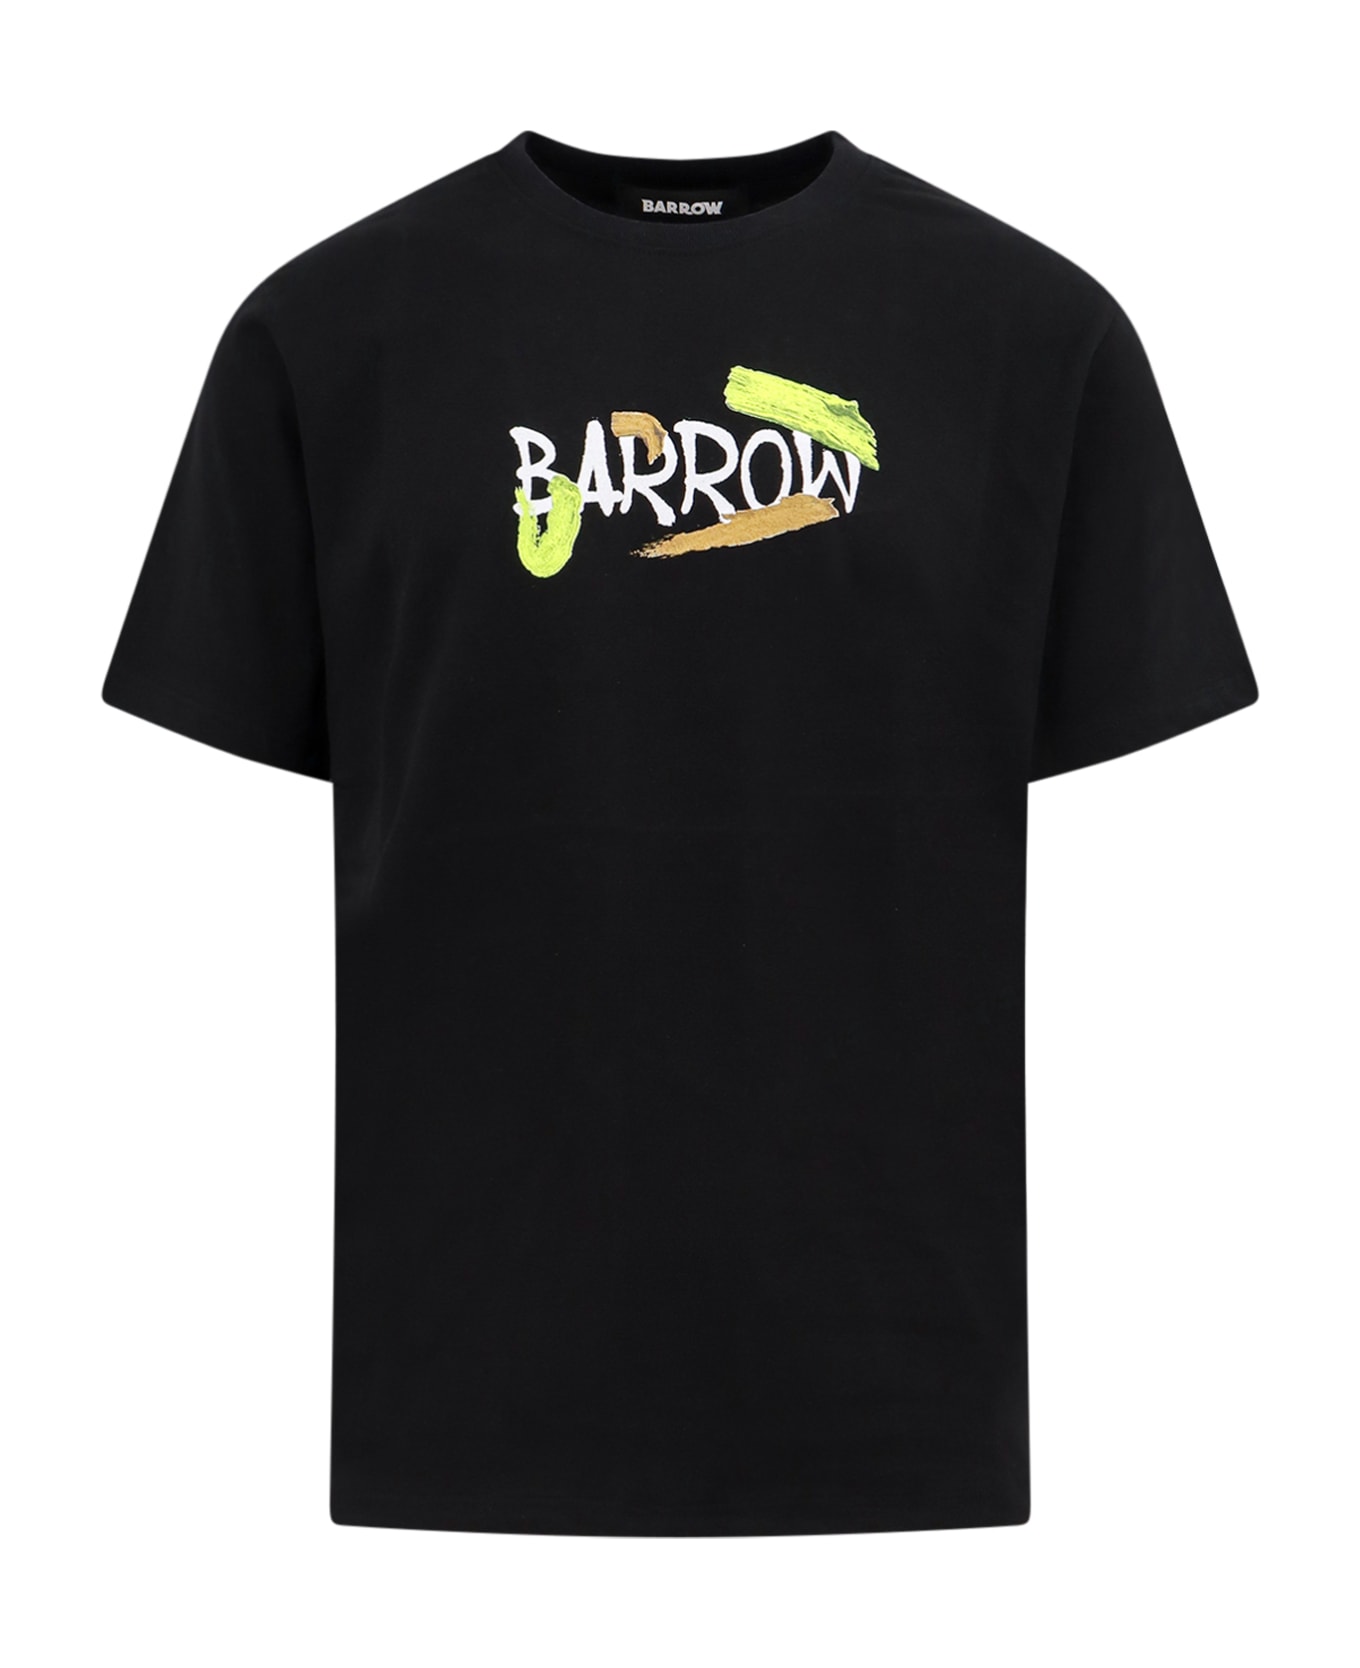 Barrow Black T-shirt With Lettering And Graphic Print - Black シャツ